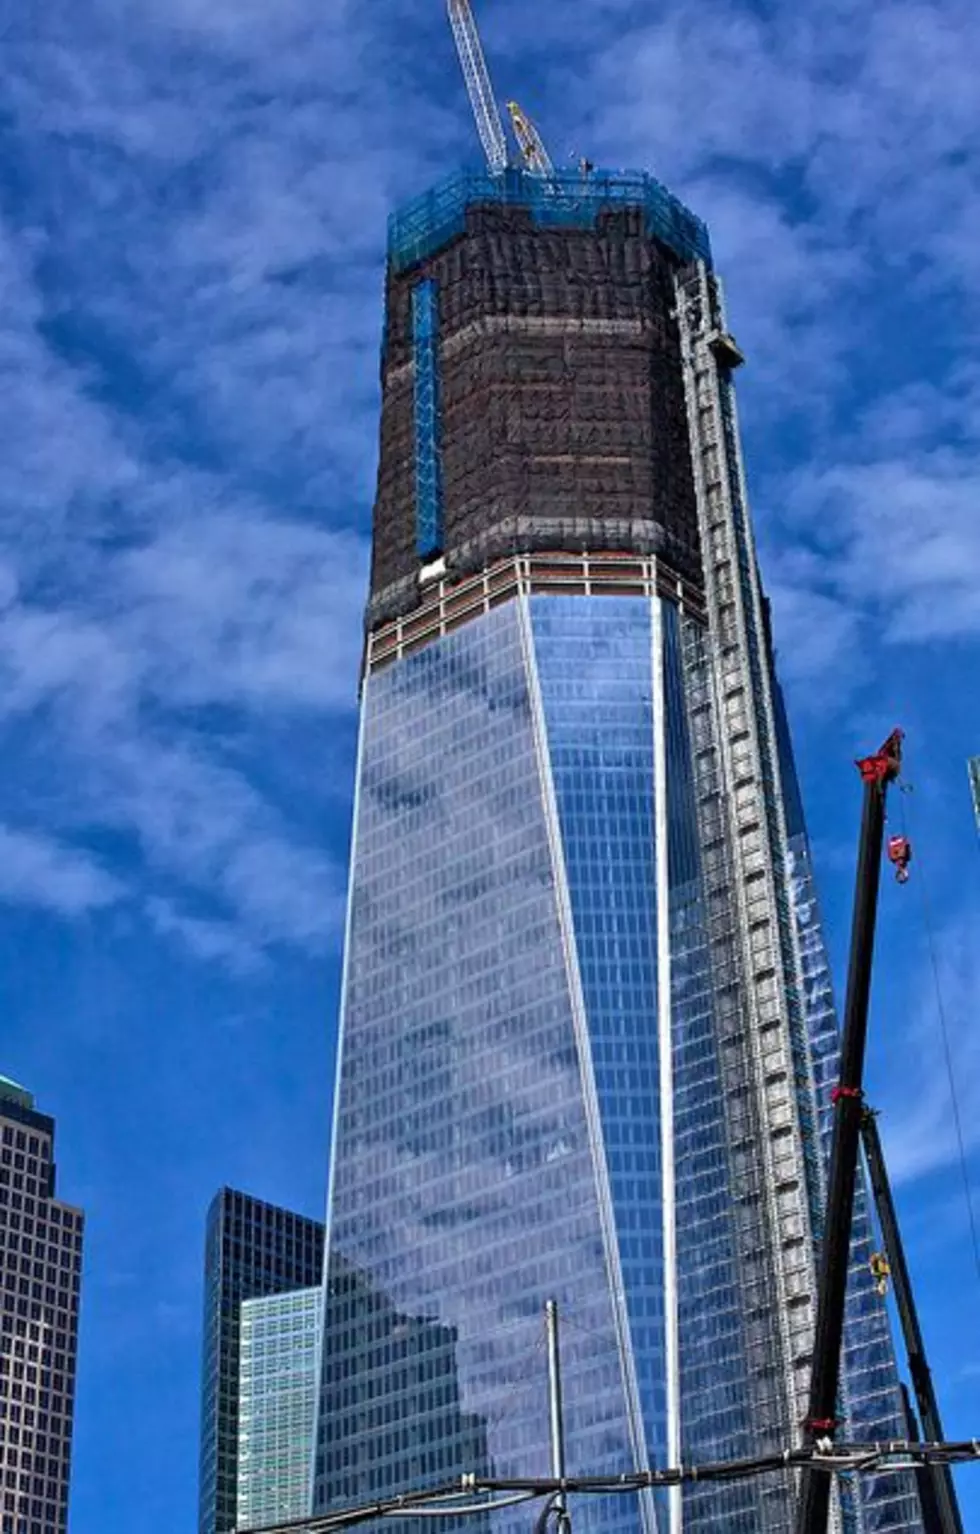 The Freedom Tower is Now New York’s Tallest Building – Here Are Four Facts